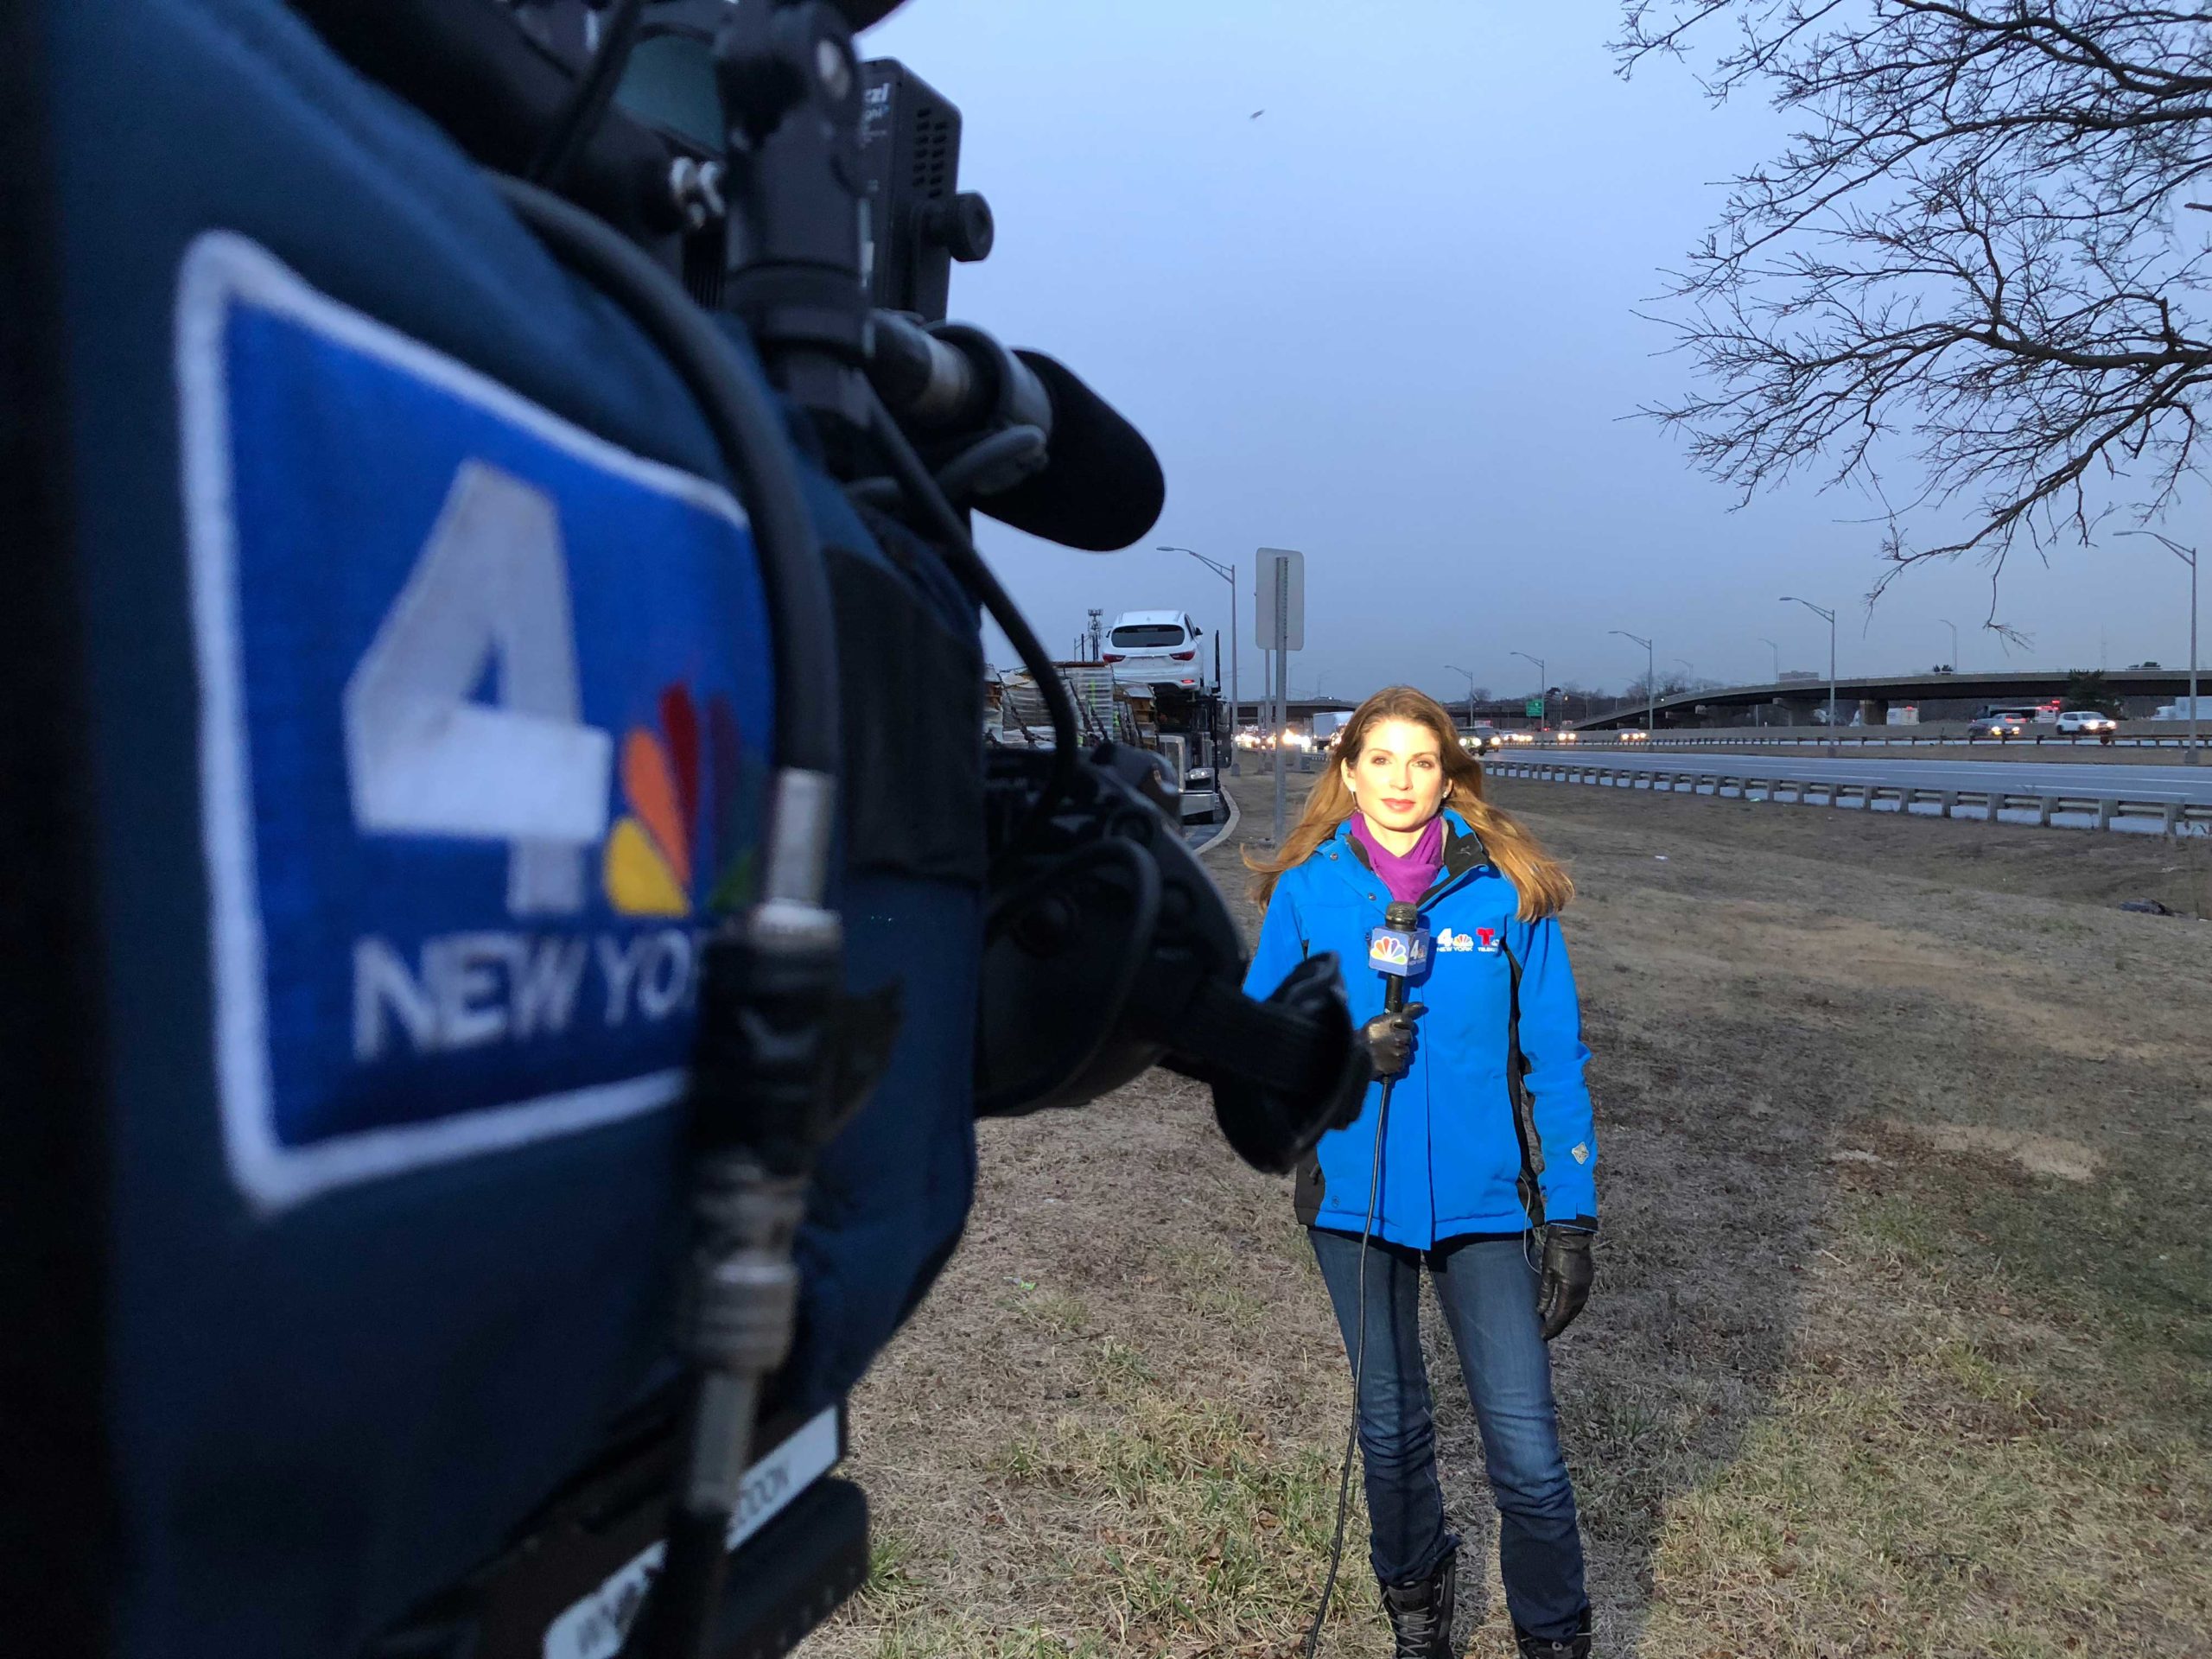 Jen on the field in front of a throughway, wearing an NBC 4 New York winter jacket. Picture is taken from behind a news camera with the NBC 4 New York logo on the side.